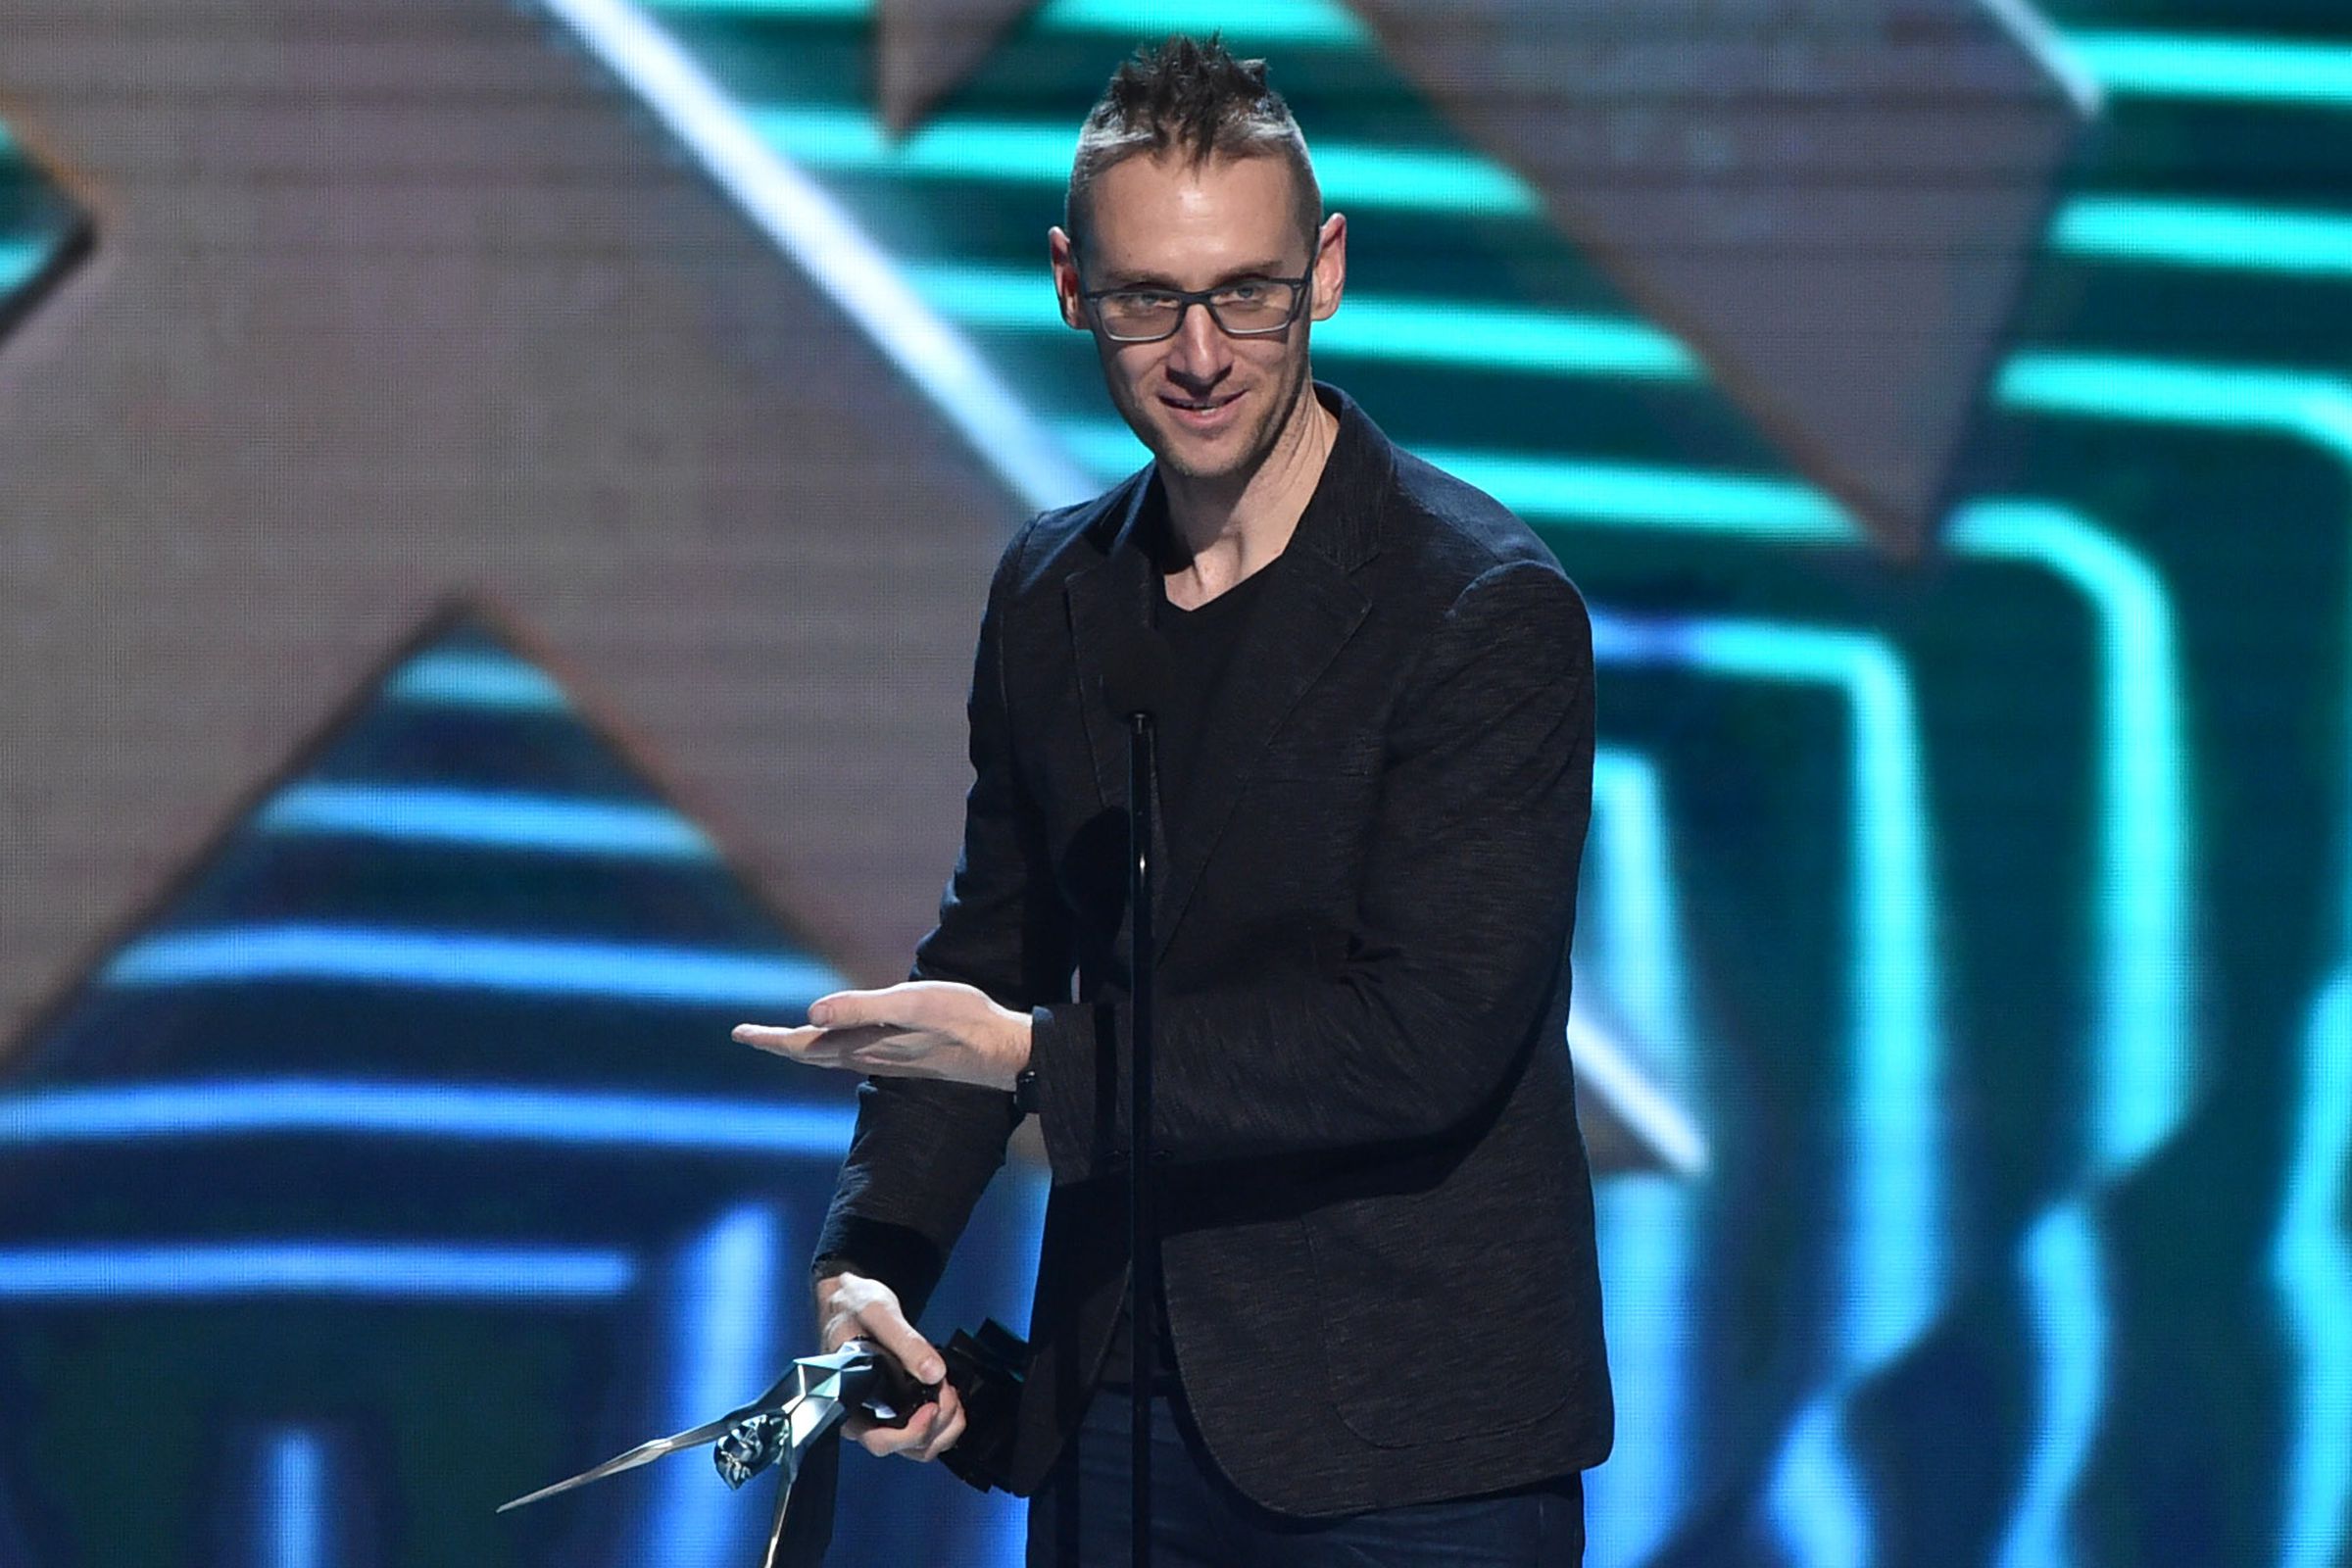 A man with glasses and a sharp nose holds an awards statue onstage